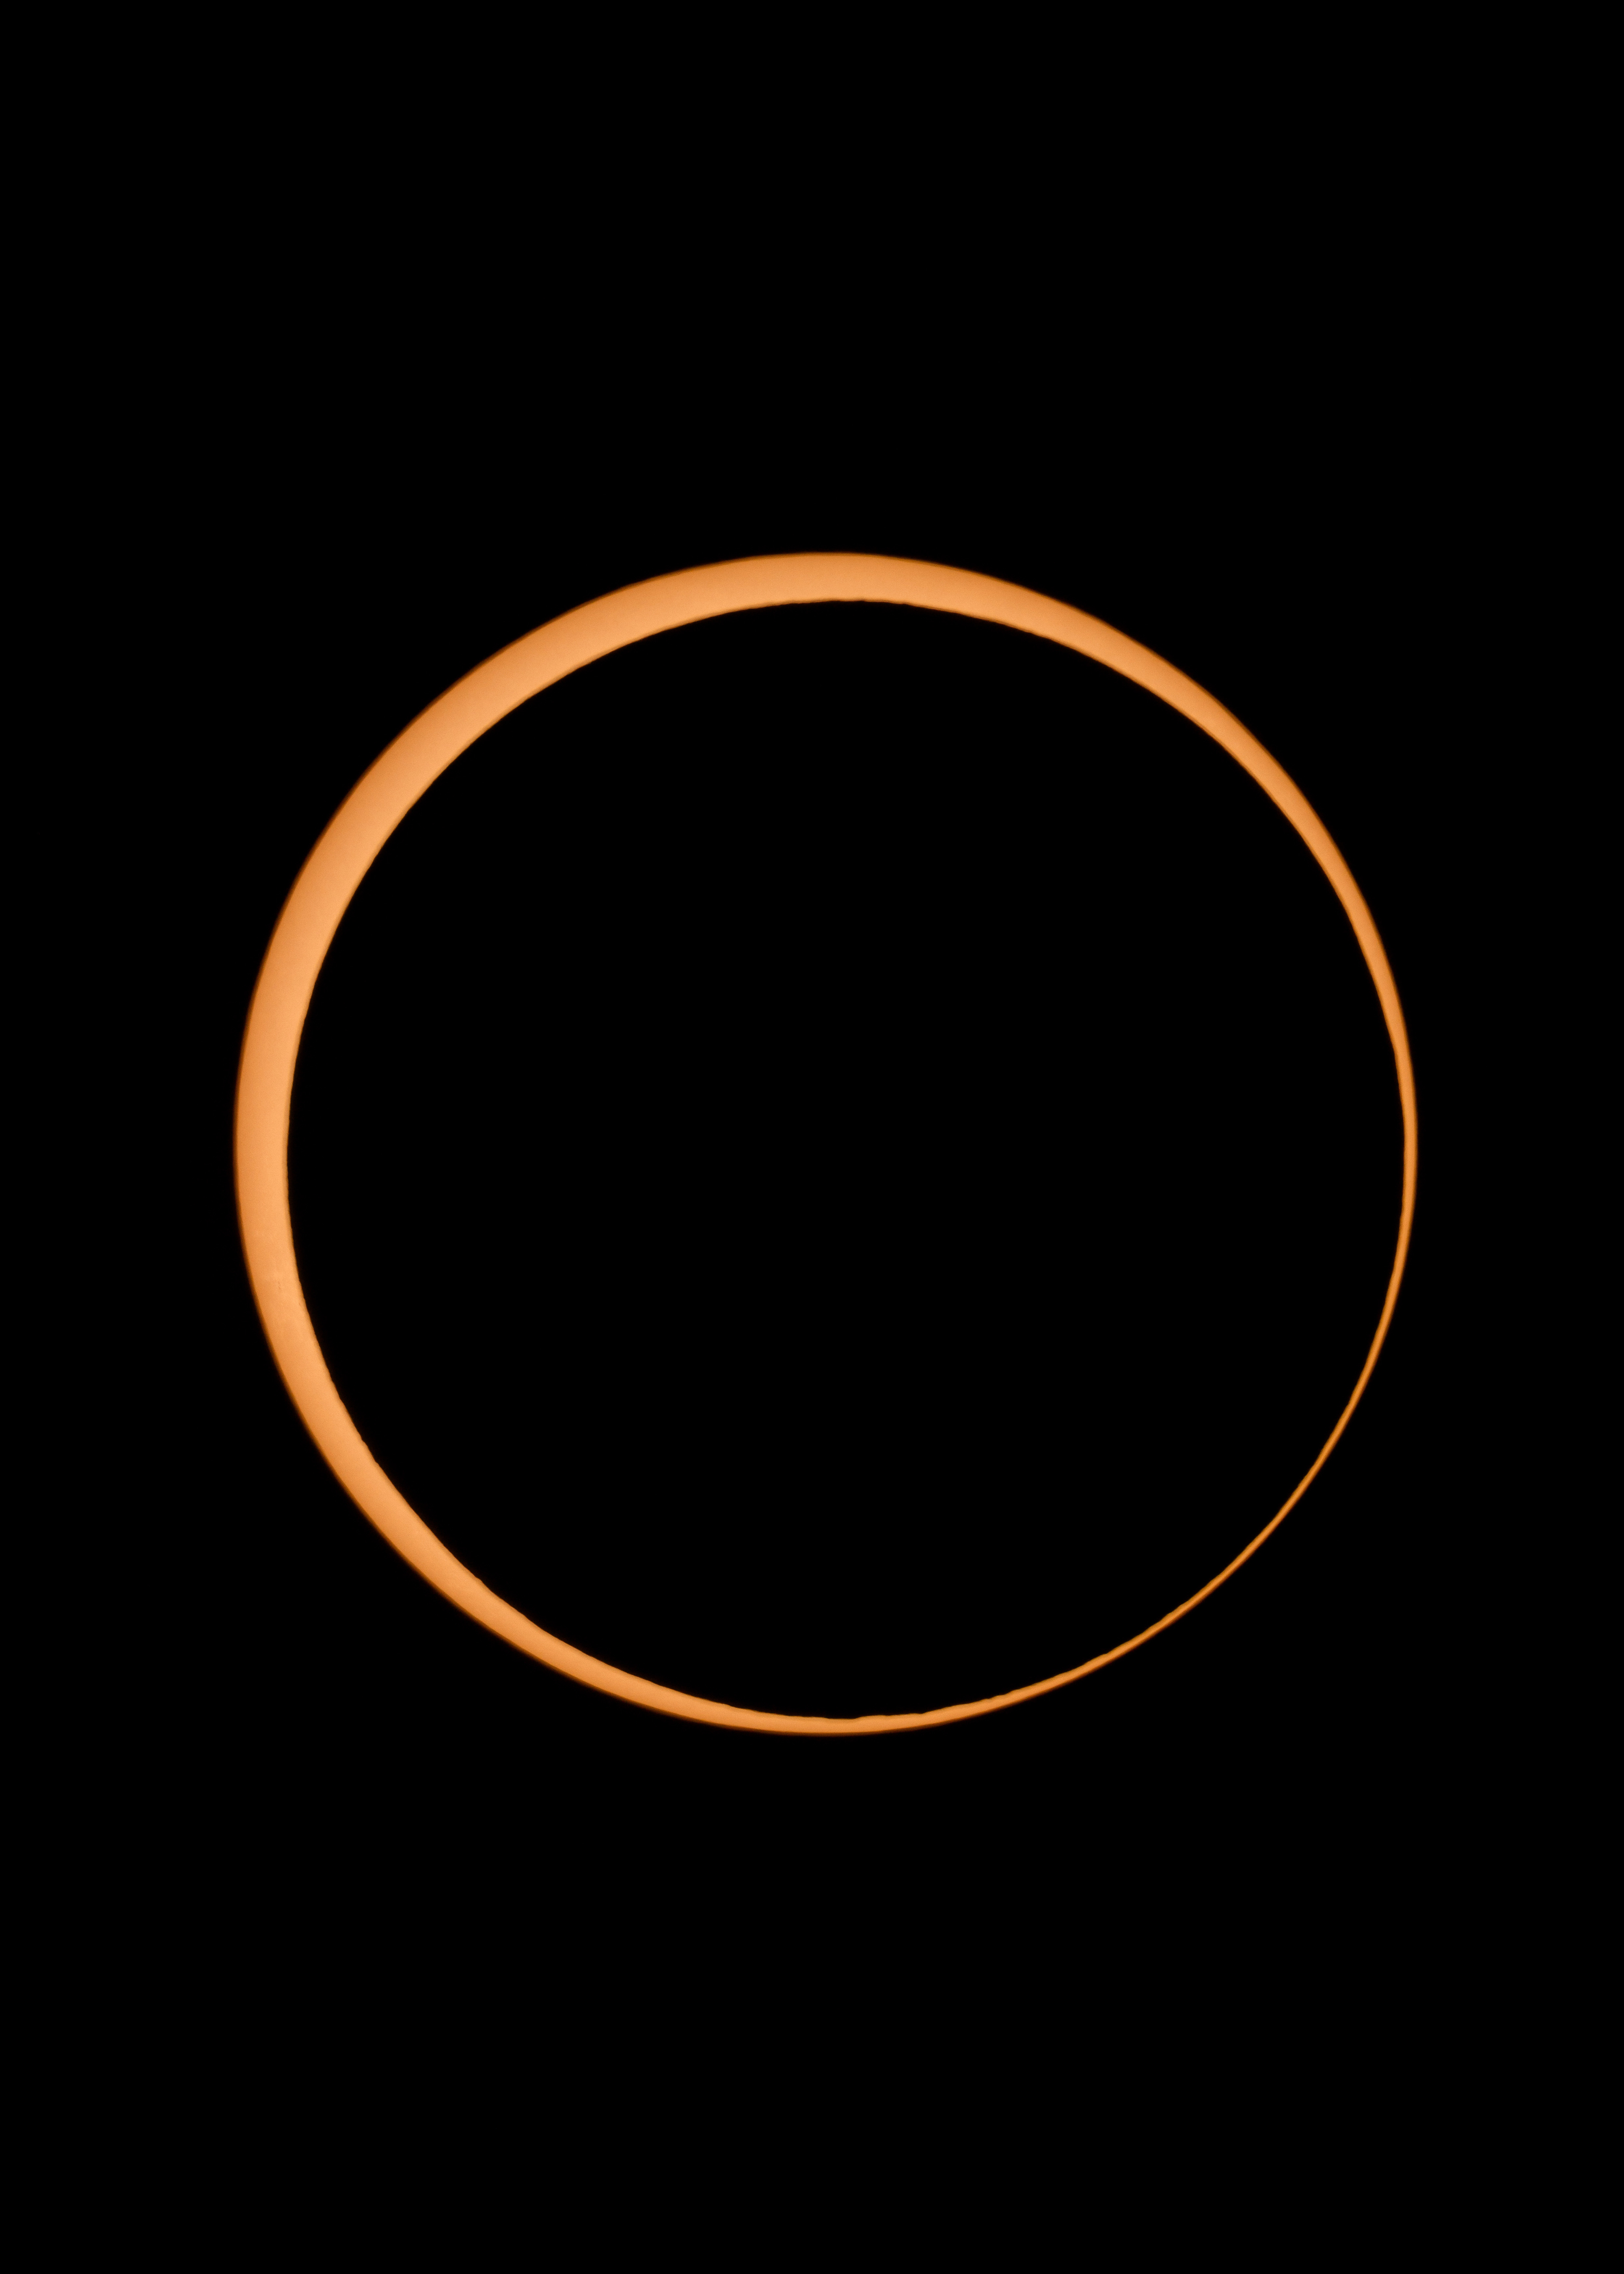 How to safely view the 'ring of fire' annular solar eclipse | verifythis.com